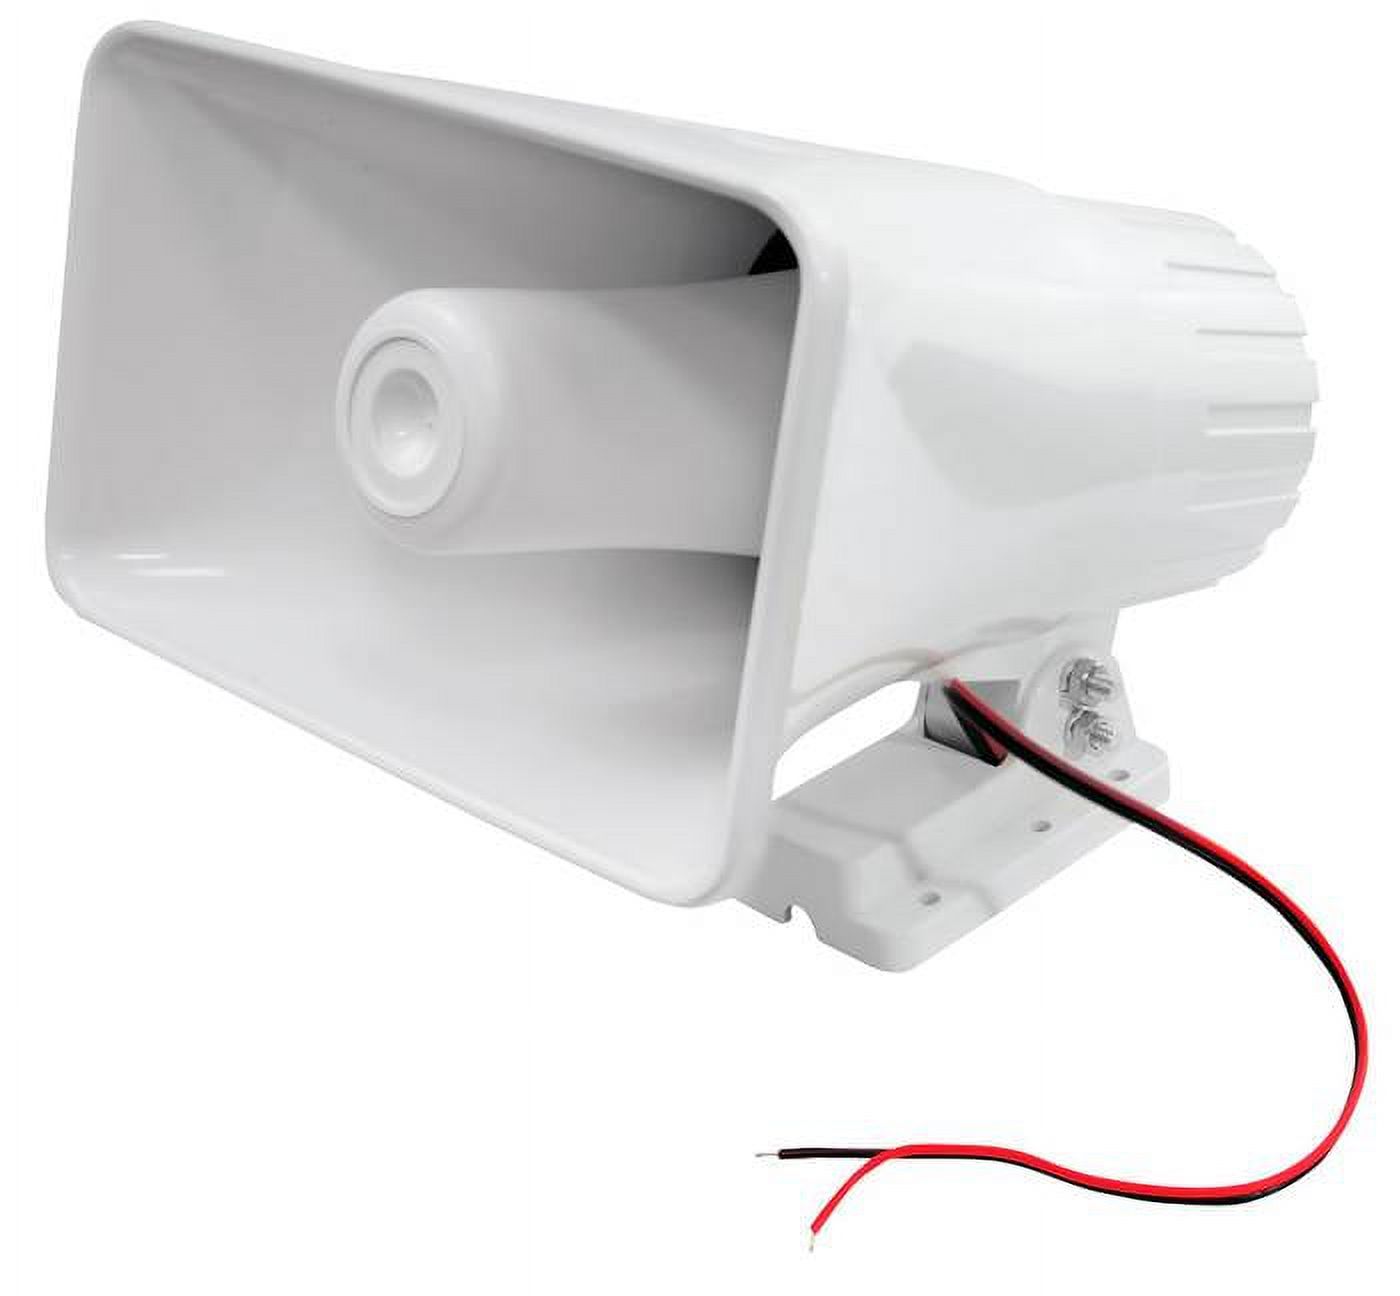 Pyle PHSP5 8" 65W 8-Ohm Indoor & Outdoor PA Horn Speaker 65 Watts, White - image 1 of 6